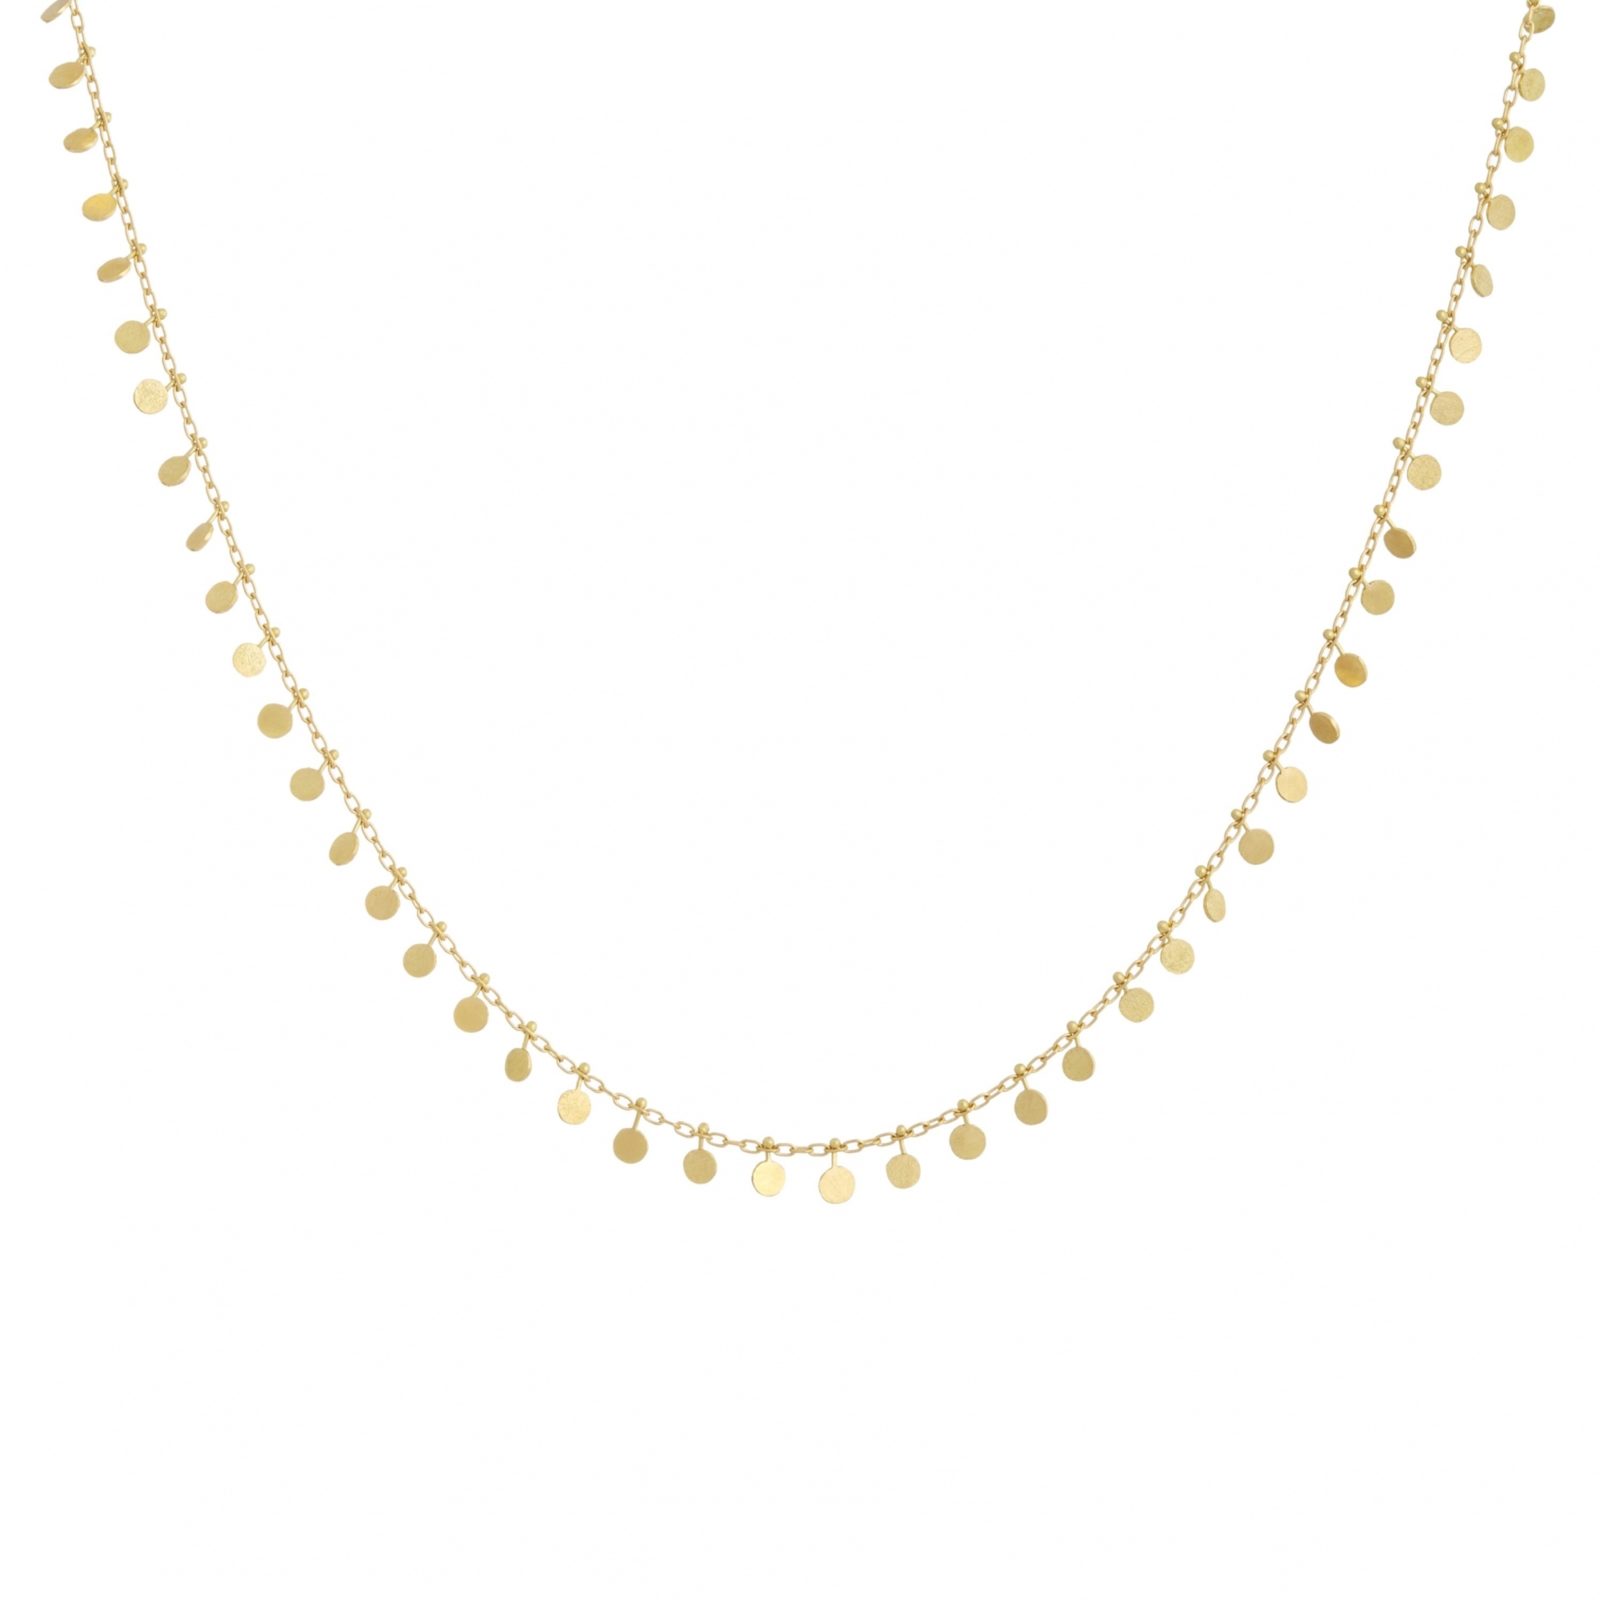 Sia Taylor DN301 Y Yellow Gold Evenly Dotted Necklace WB